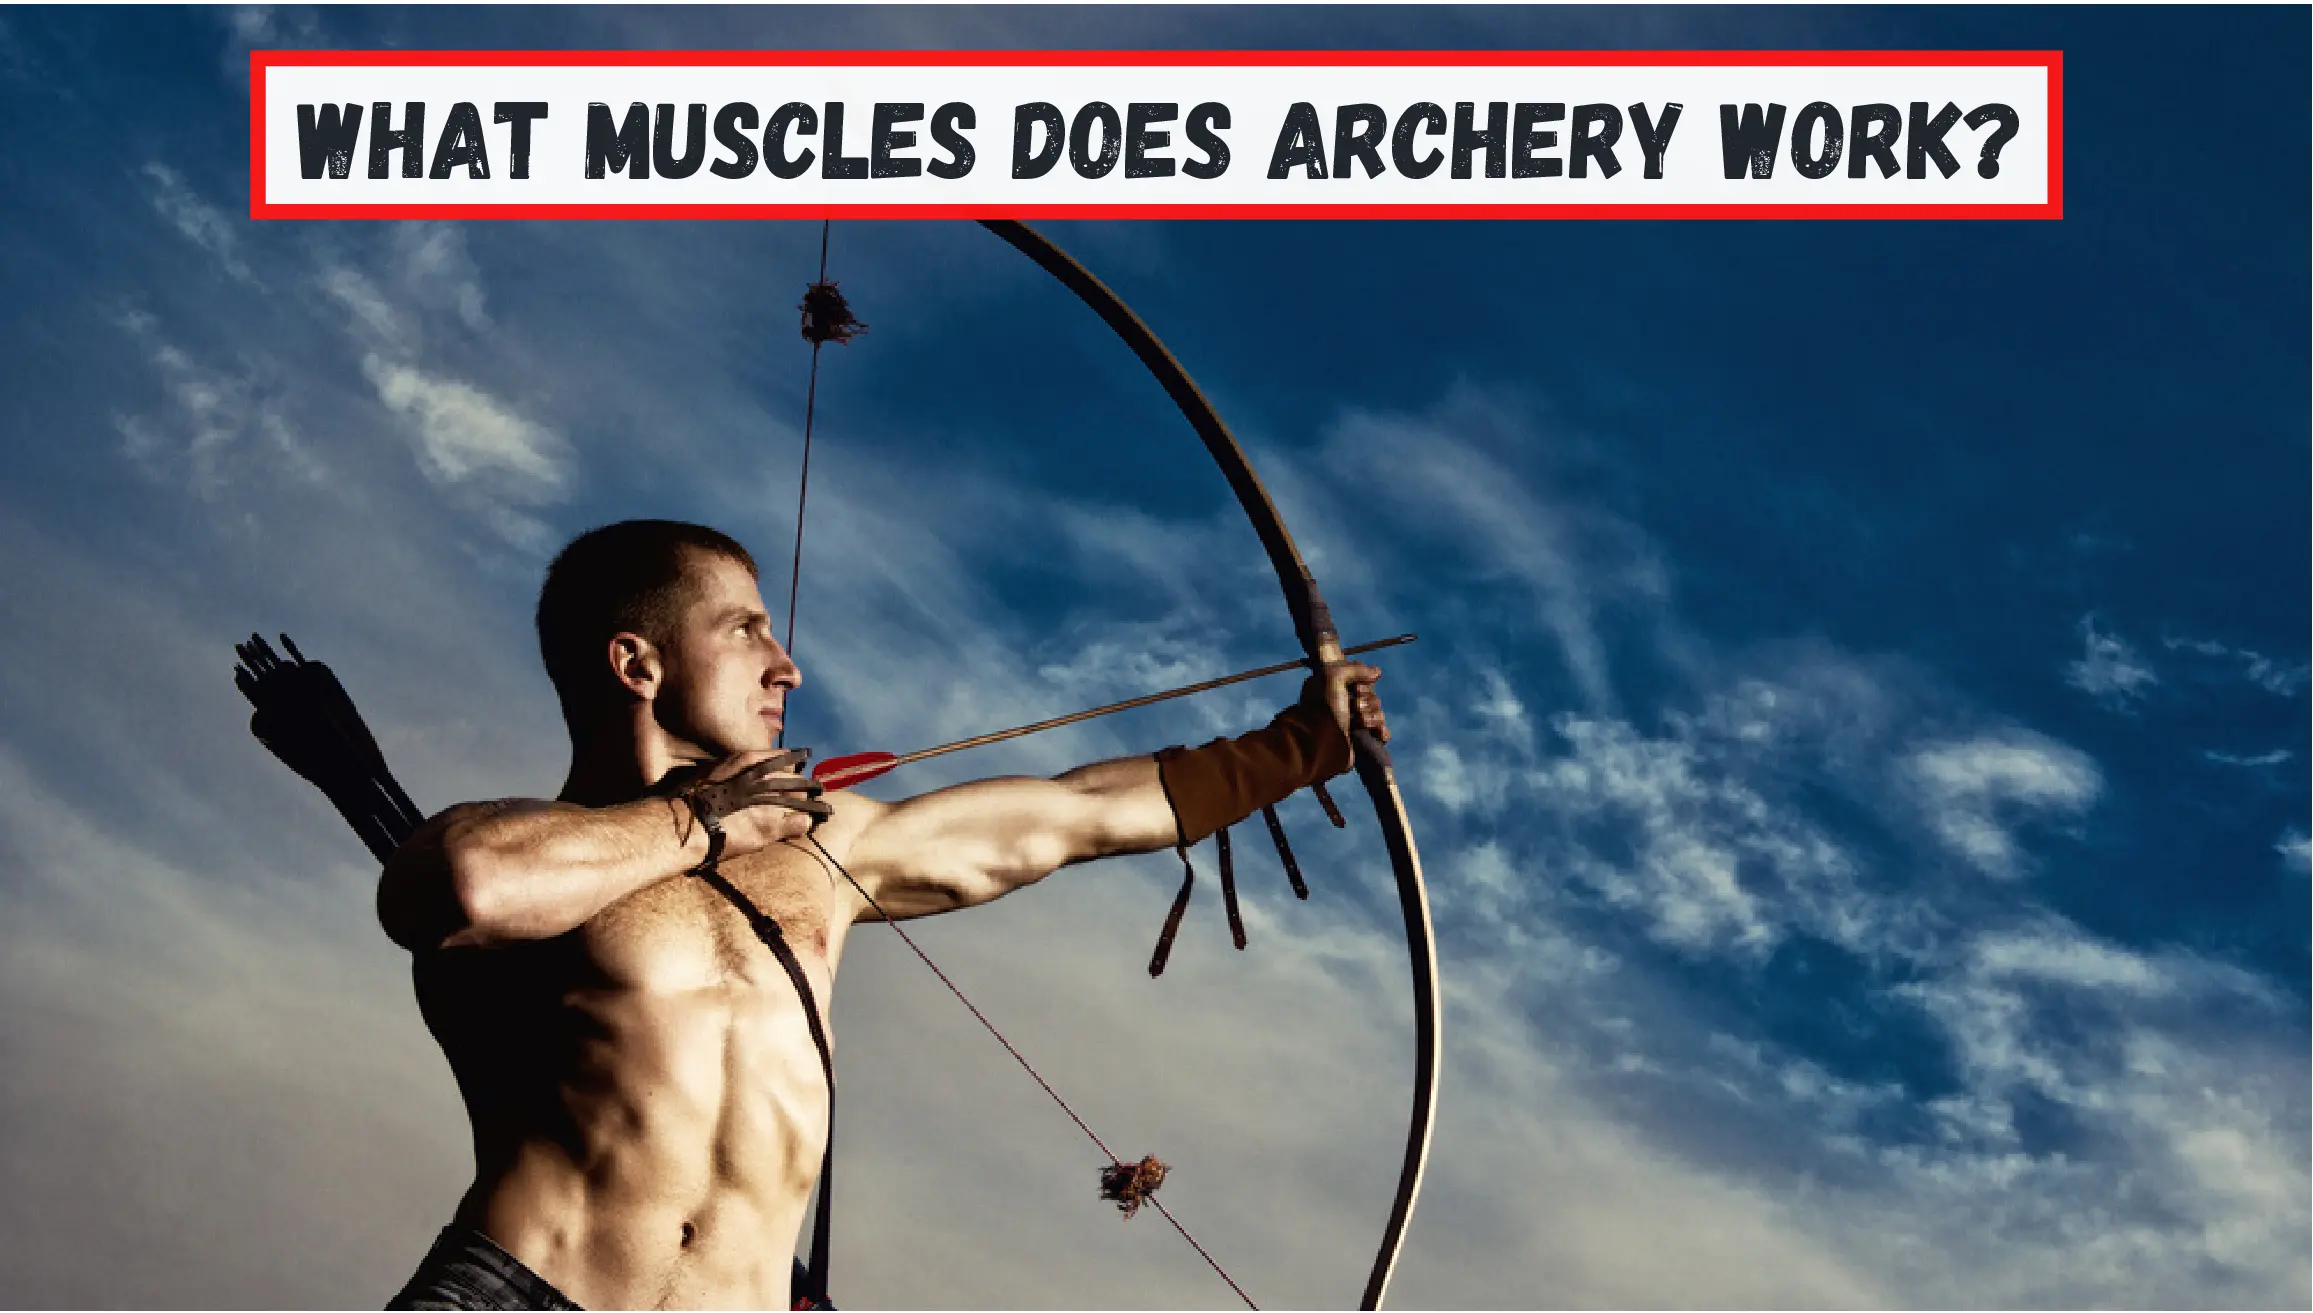 What Muscles Does Archery Develop?